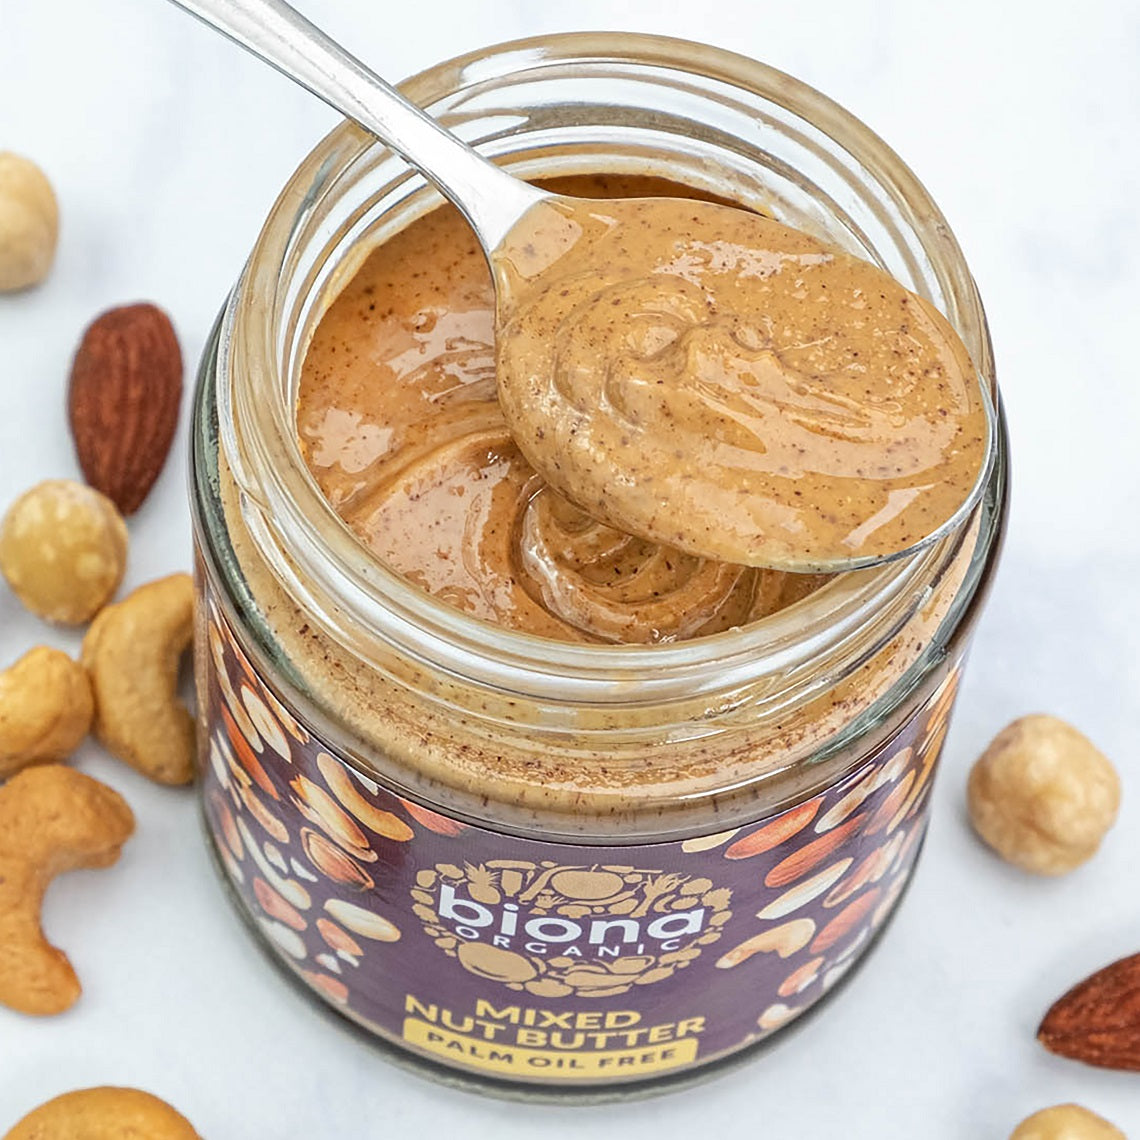 10 Wonderful (and Unexpected) Ways to Use Nut Butter